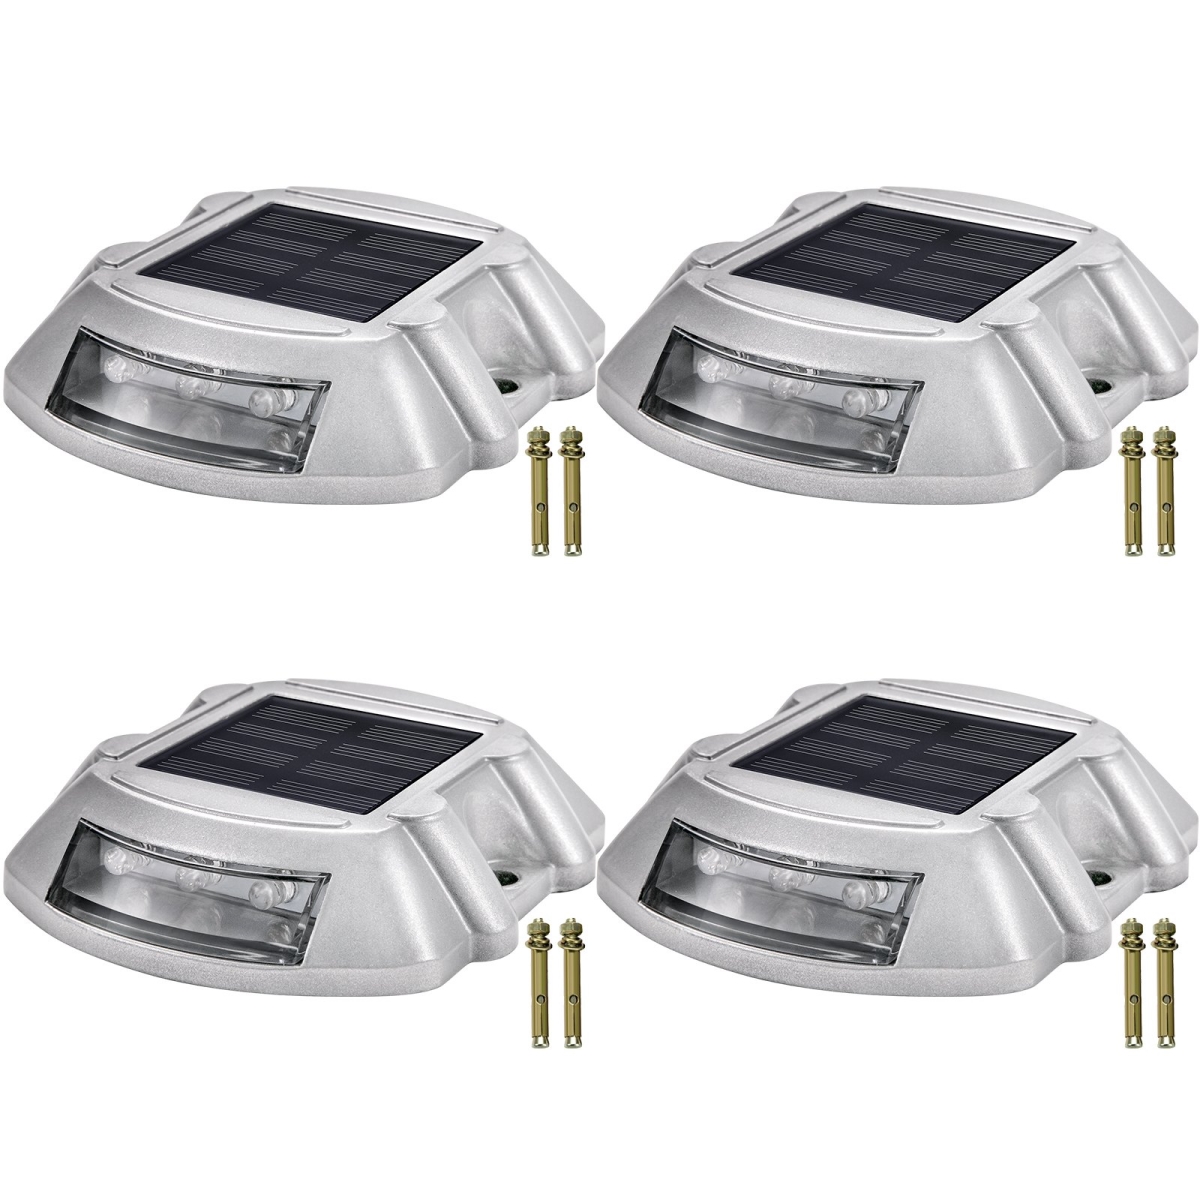 Picture of Vevor TYNDD4JTWH0000001V0 Driveway Lights - Solar Driveway Lights Bright White with Screw Solar Deck Lights Outdoor Waterproof Wireless Dock Lights 6 LEDs - Pack of 4